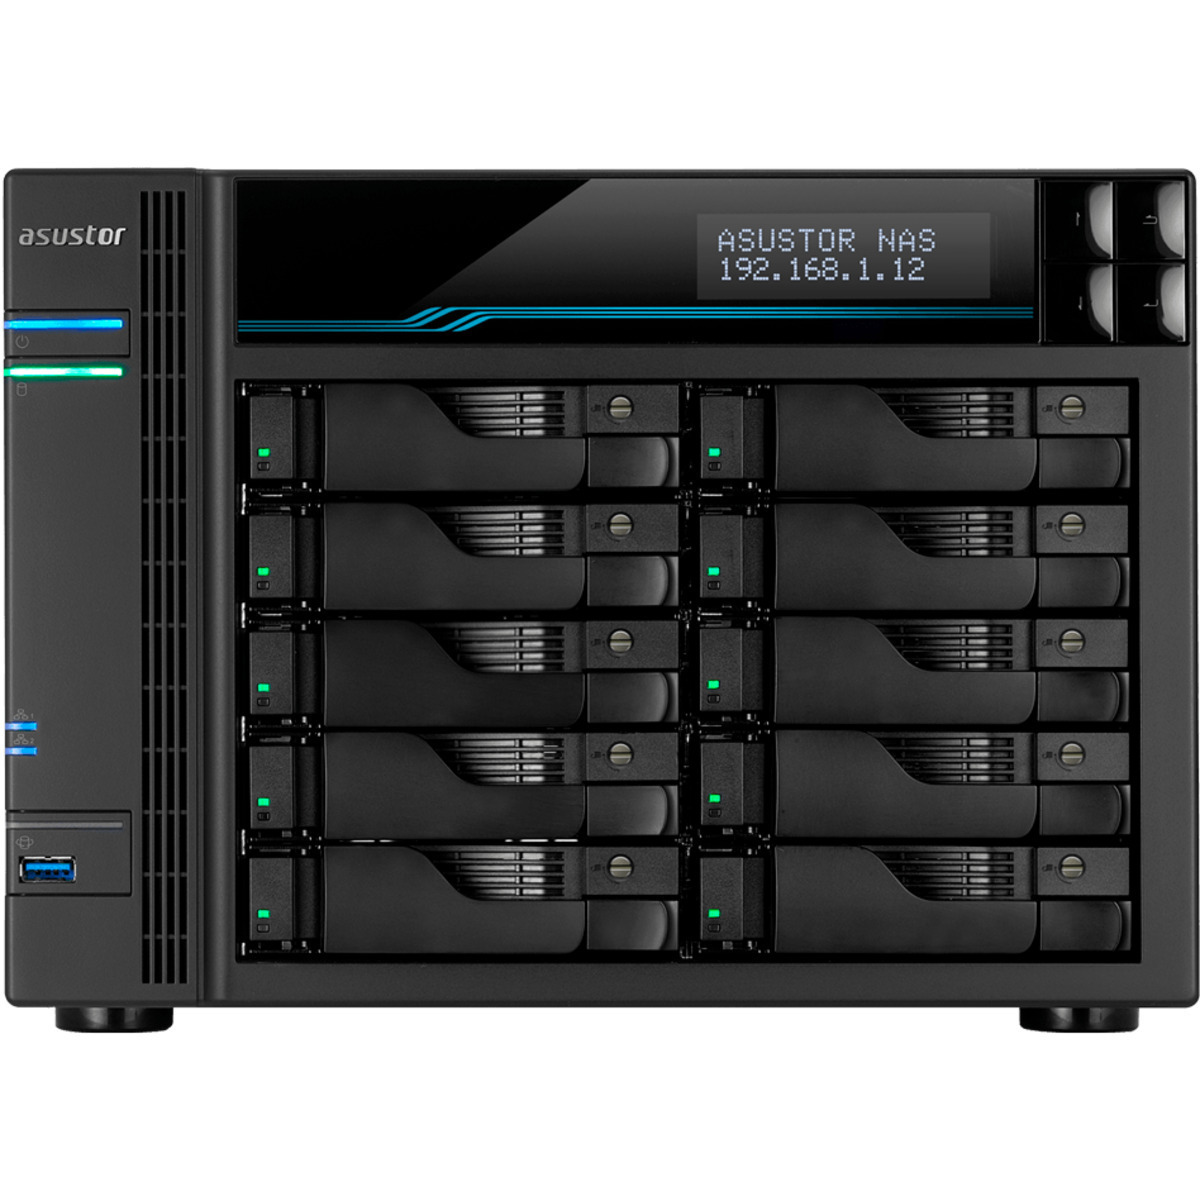 buy ASUSTOR AS7110T Lockerstor 10 Pro 10tb Desktop NAS - Network Attached Storage Device 10x1000gb Samsung 870 EVO MZ-77E1T0BAM 2.5 560/530MB/s SATA 6Gb/s SSD CONSUMER Class Drives Installed - Burn-In Tested - nas headquarters buy network attached storage server device das new raid-5 free shipping usa spring sale AS7110T Lockerstor 10 Pro